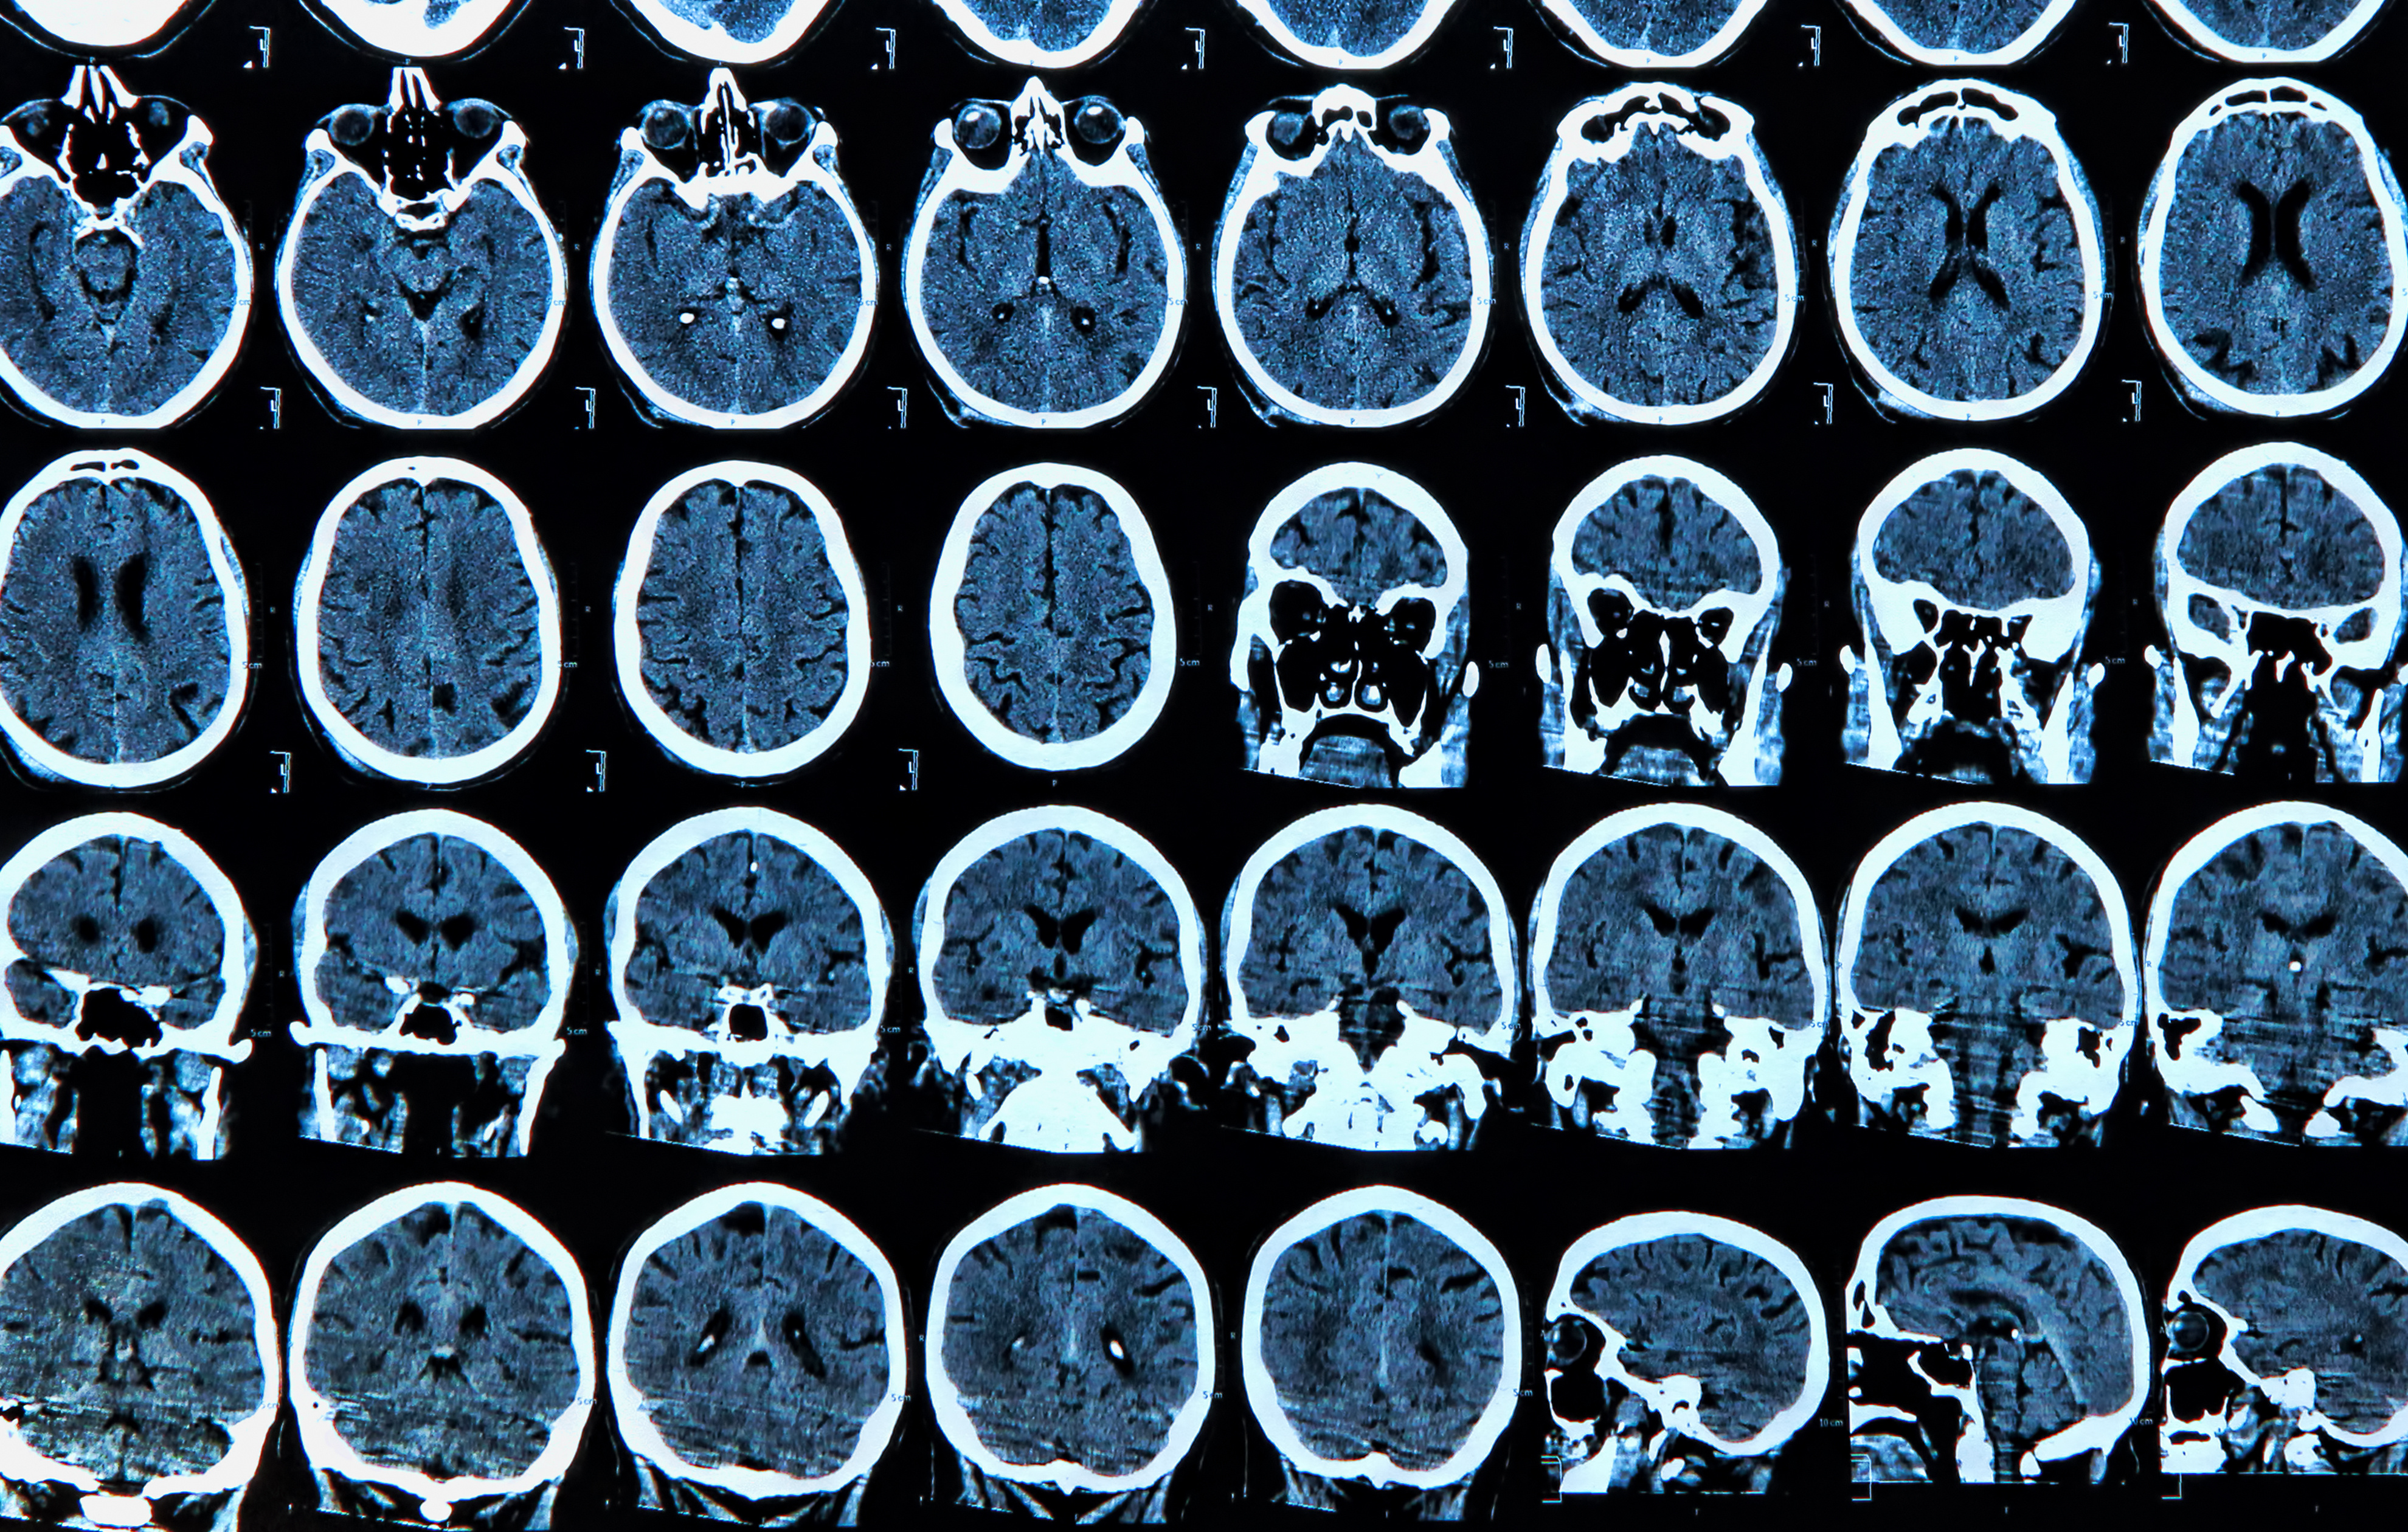 New Study Shows Link Between COVID-19 and Elevated Risks for Neurological Disorders - Diagnostic Imaging